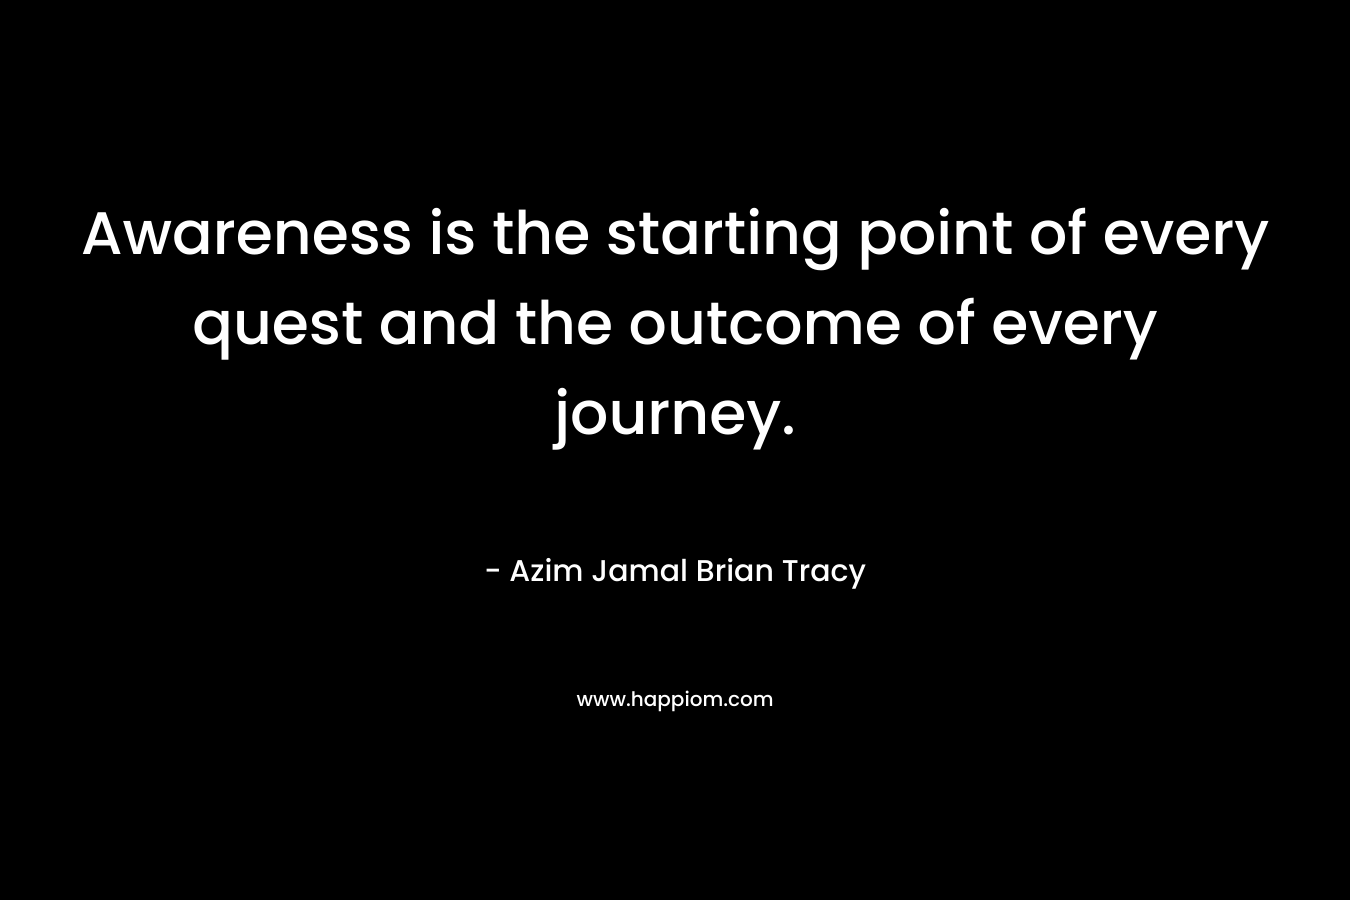 Awareness is the starting point of every quest and the outcome of every journey.